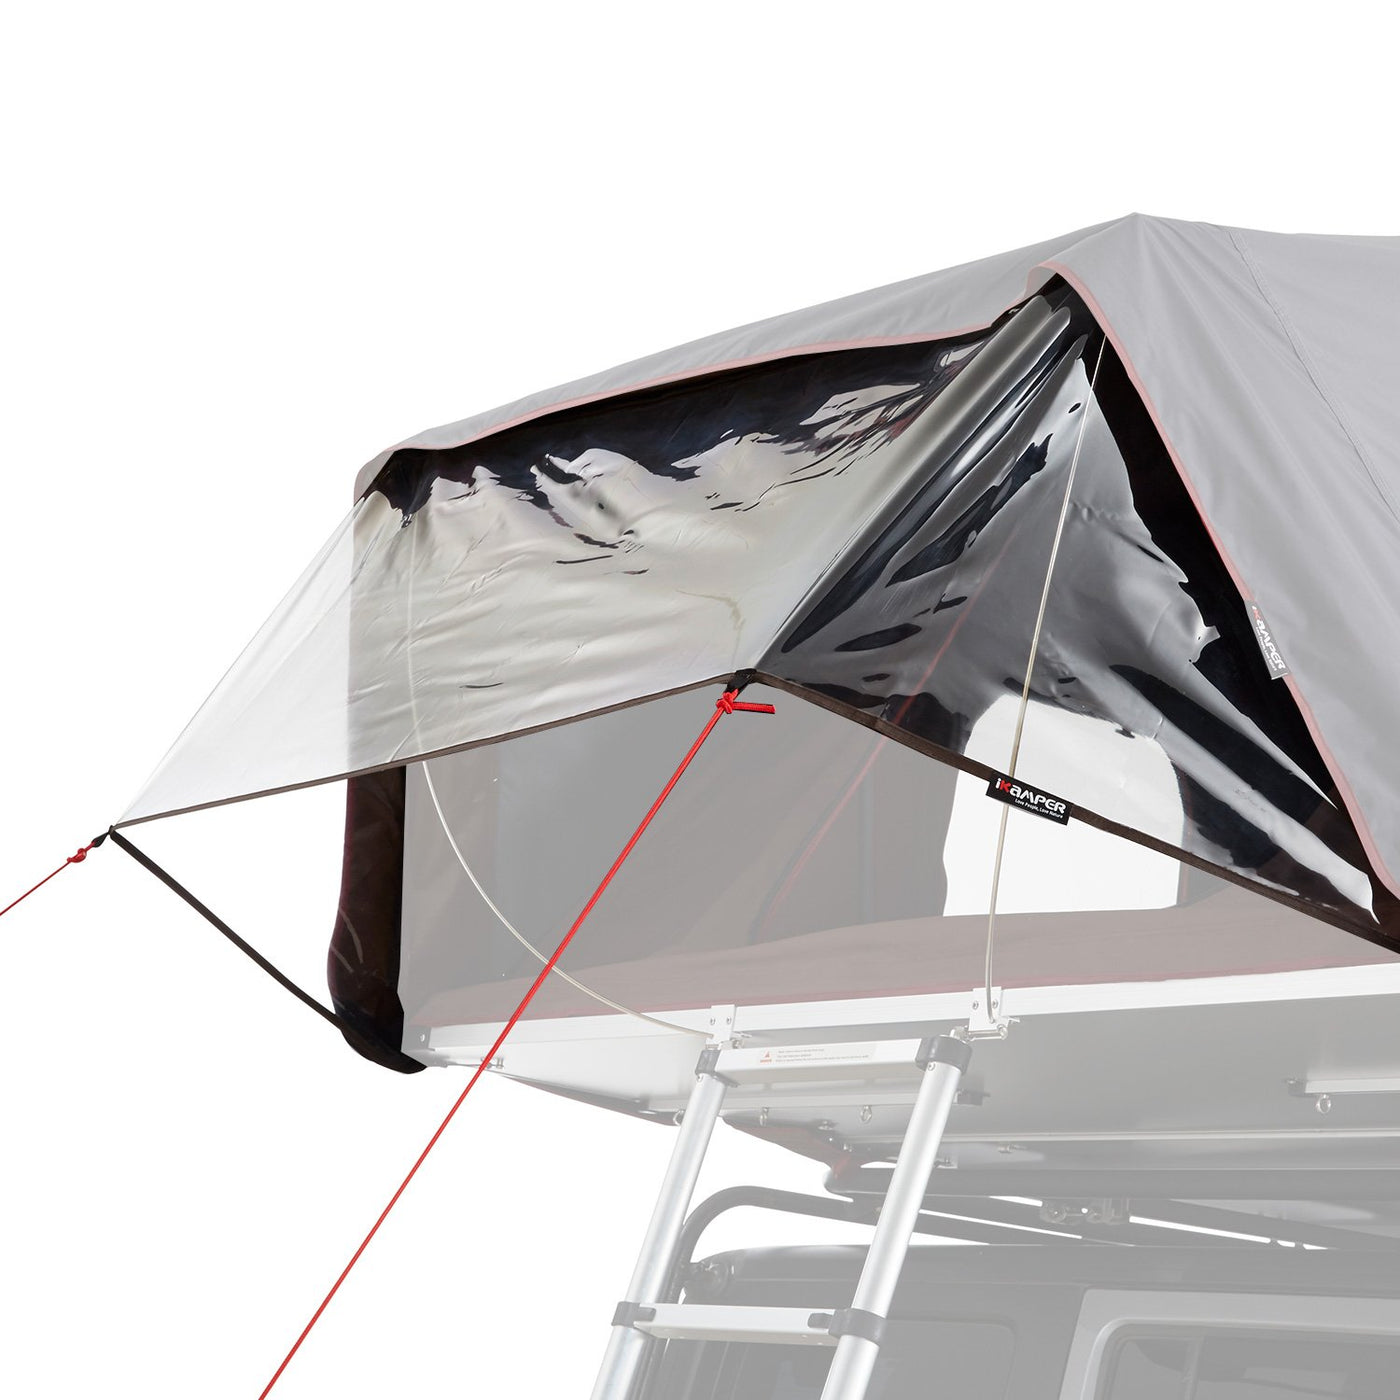 iKamper Vinyl Canopy - Overland Outfitters